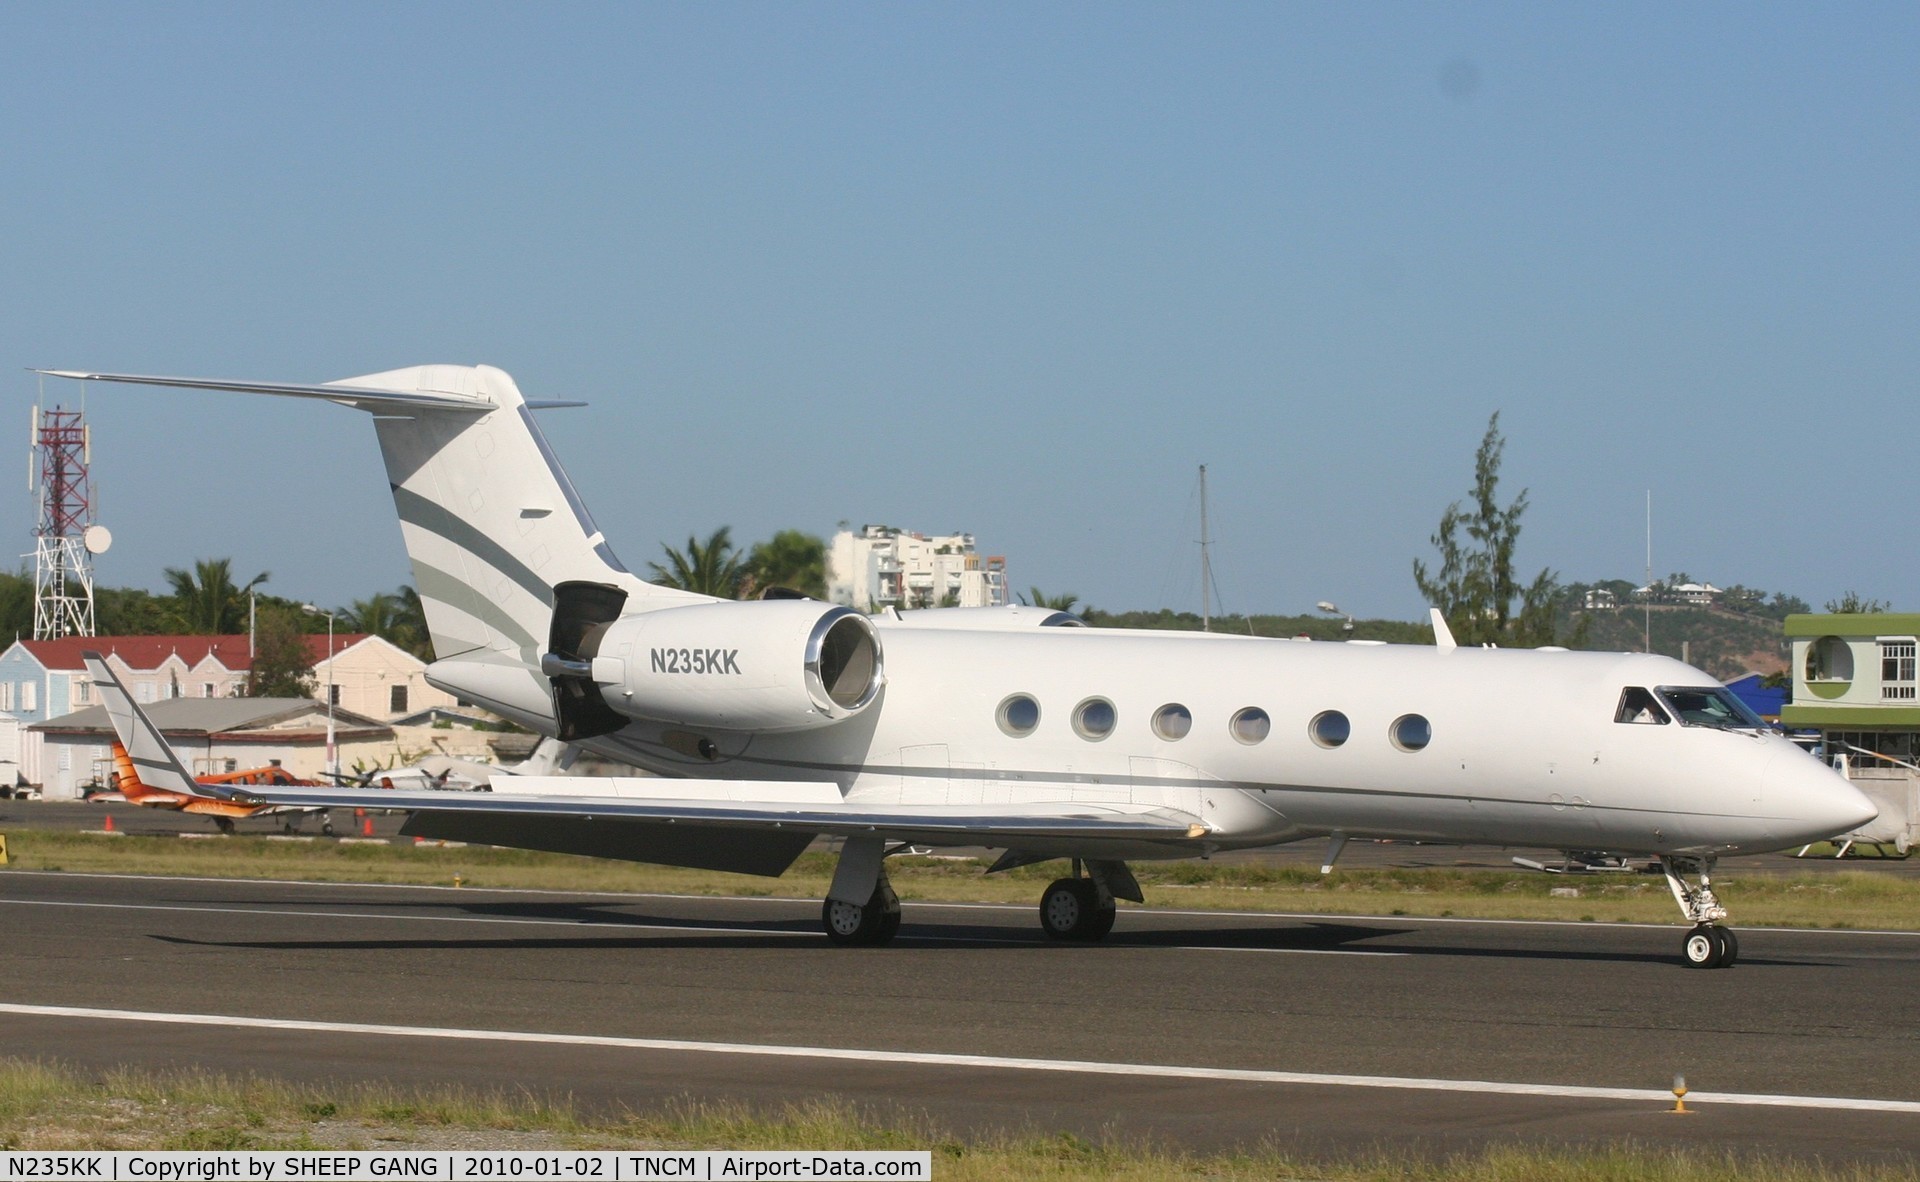 N235KK, 2001 Gulfstream Aerospace G-IV C/N 1458, N235KK Just landed at TNCM and making use of all there stopping power